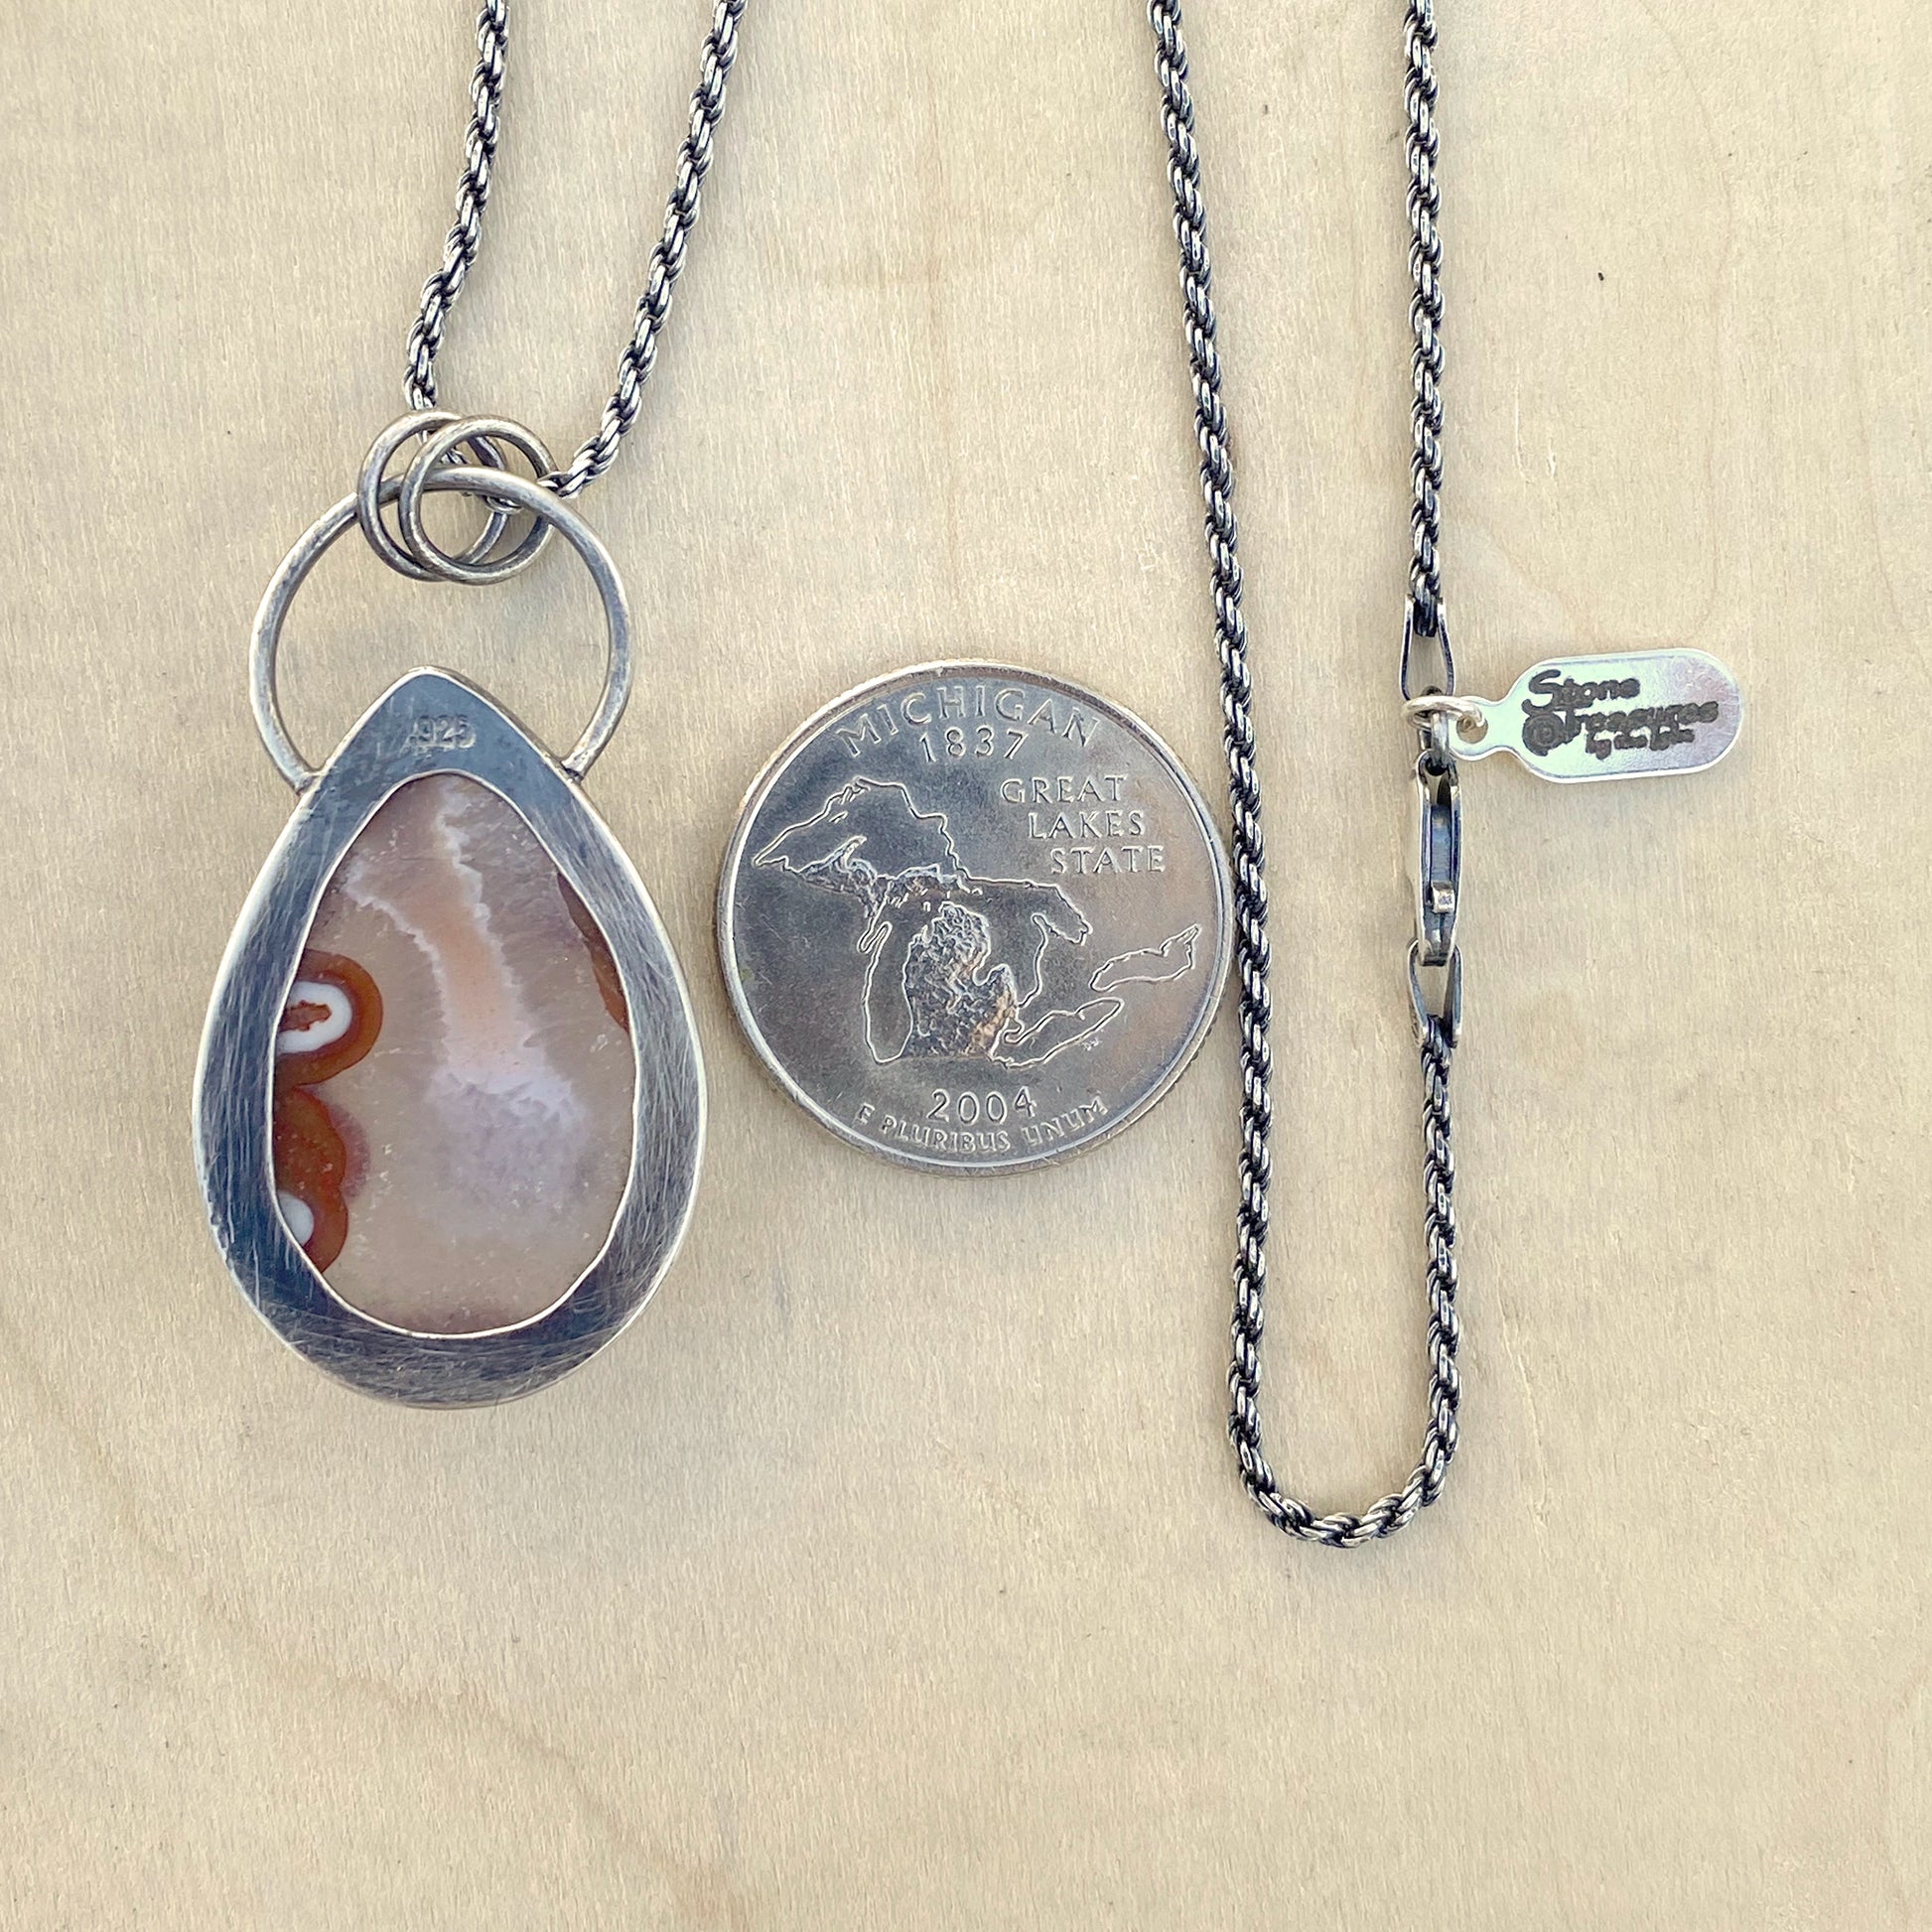 Apple Valley Lace Agate Pendant Necklace - Stone Treasures by the Lake